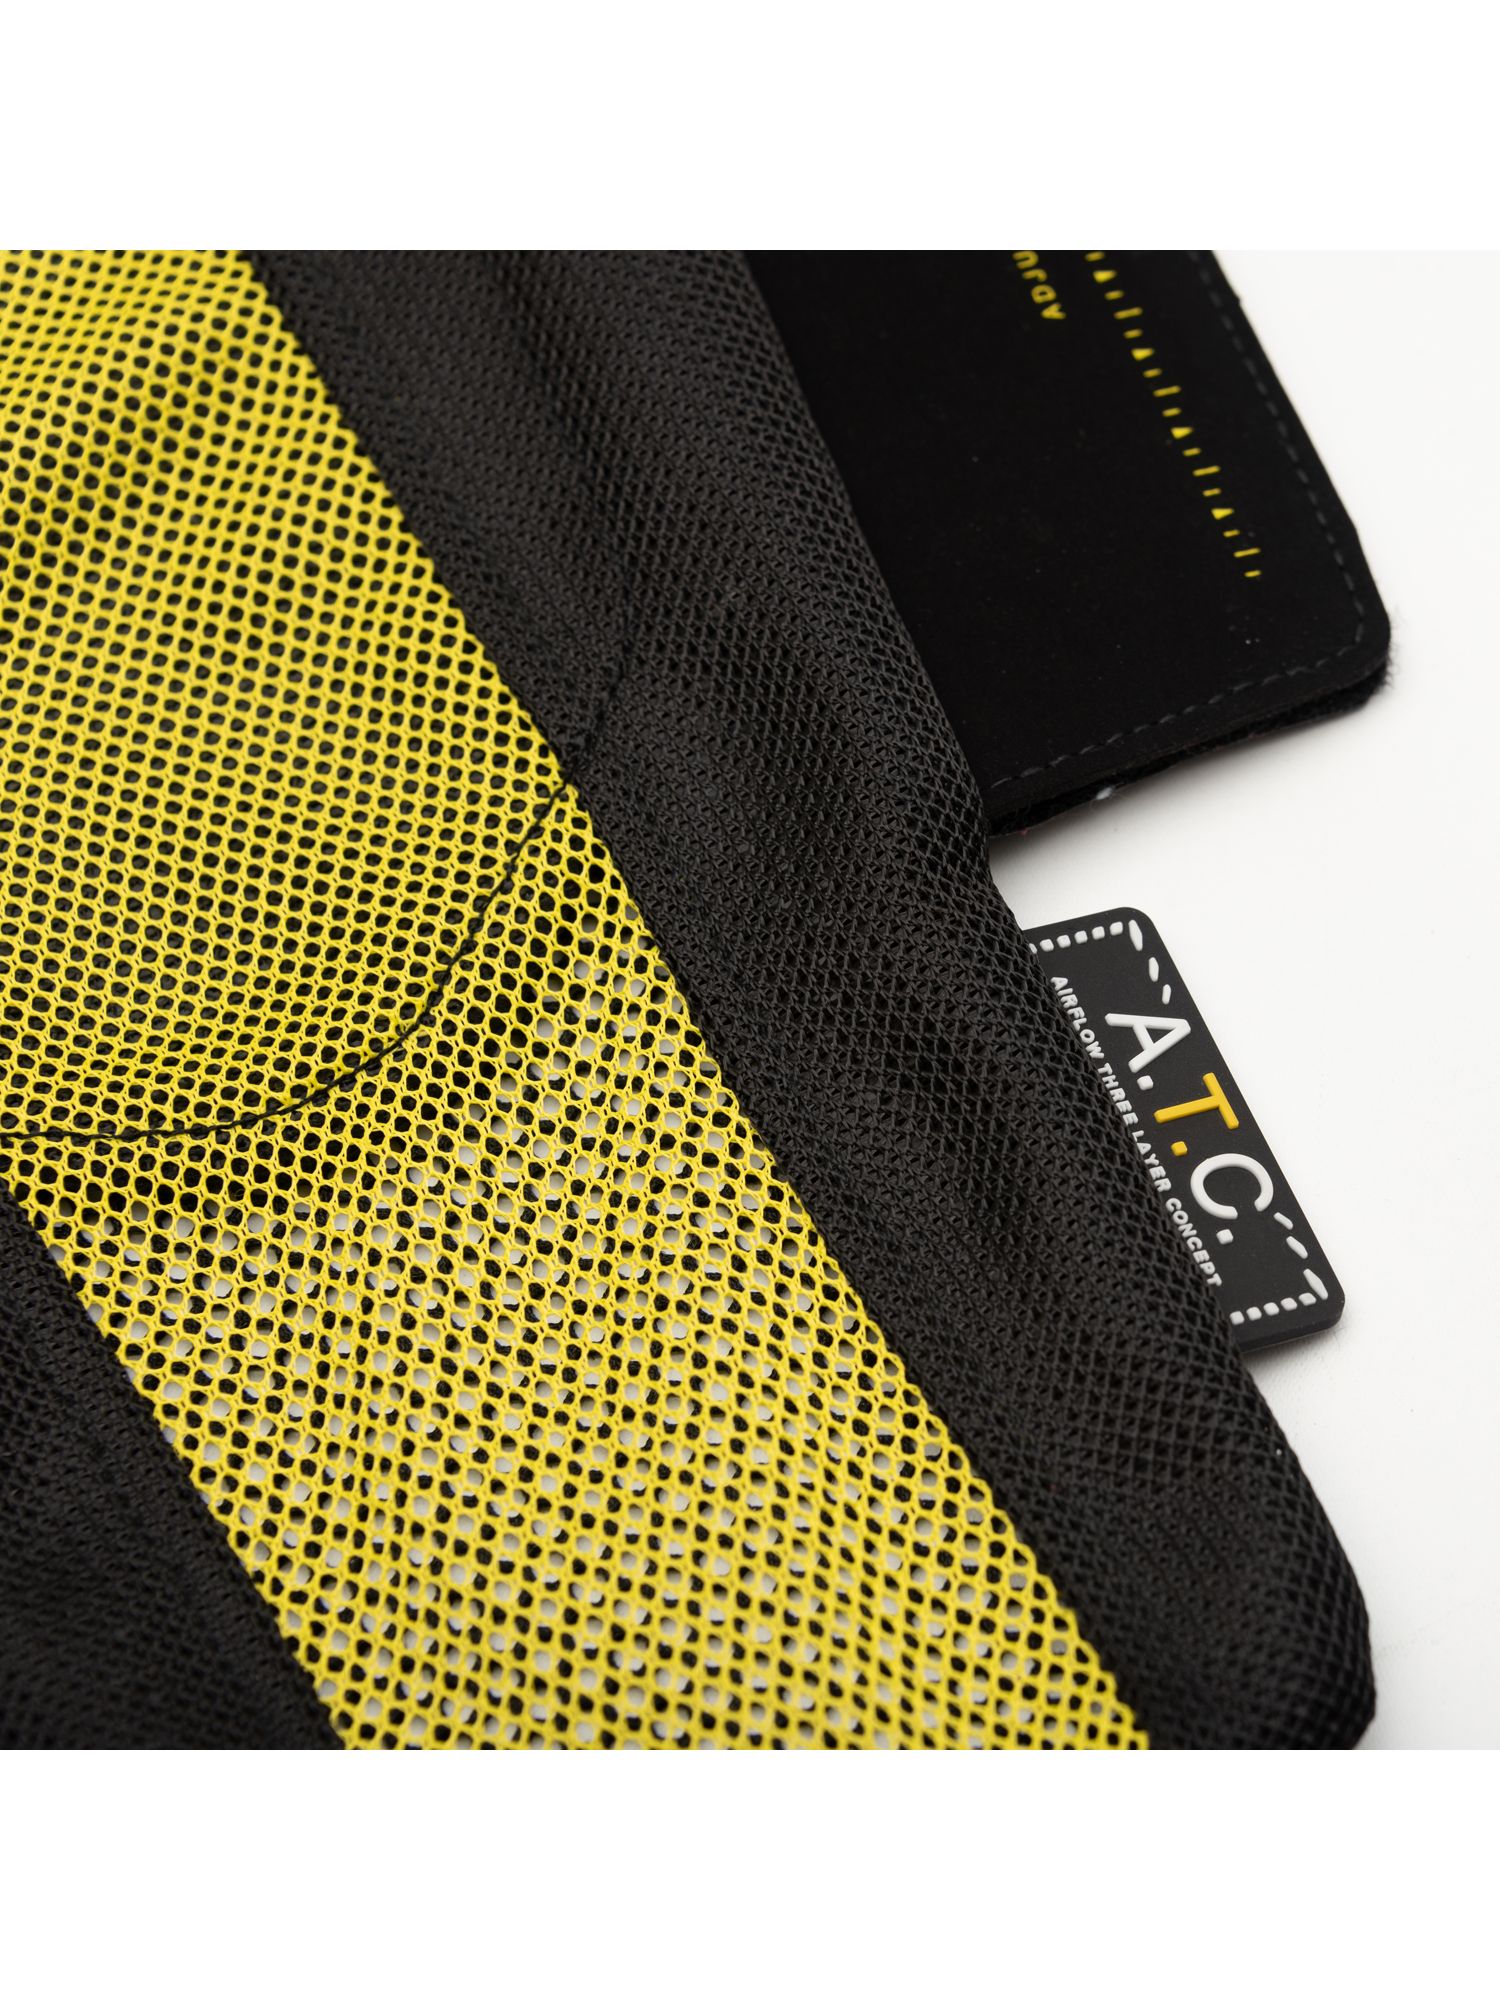 NXV019 | STEALTH CE BACK PROTECTOR［1color］